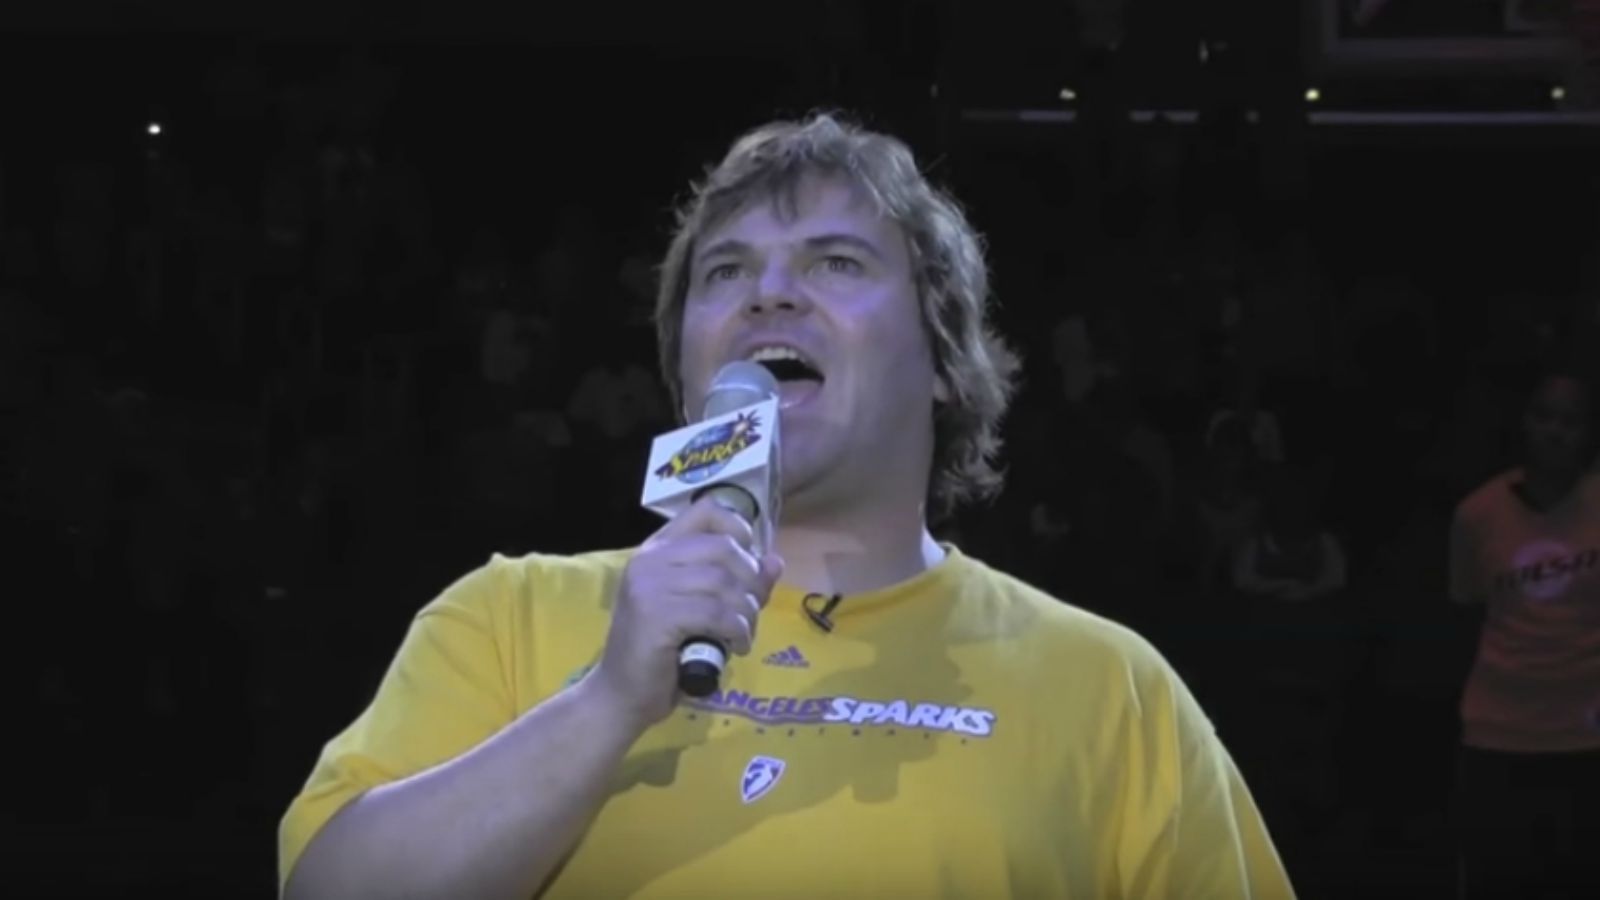 Jack Black Sings the National Anthem Before a WNBA Game and Proves Why He’s a National Treasure